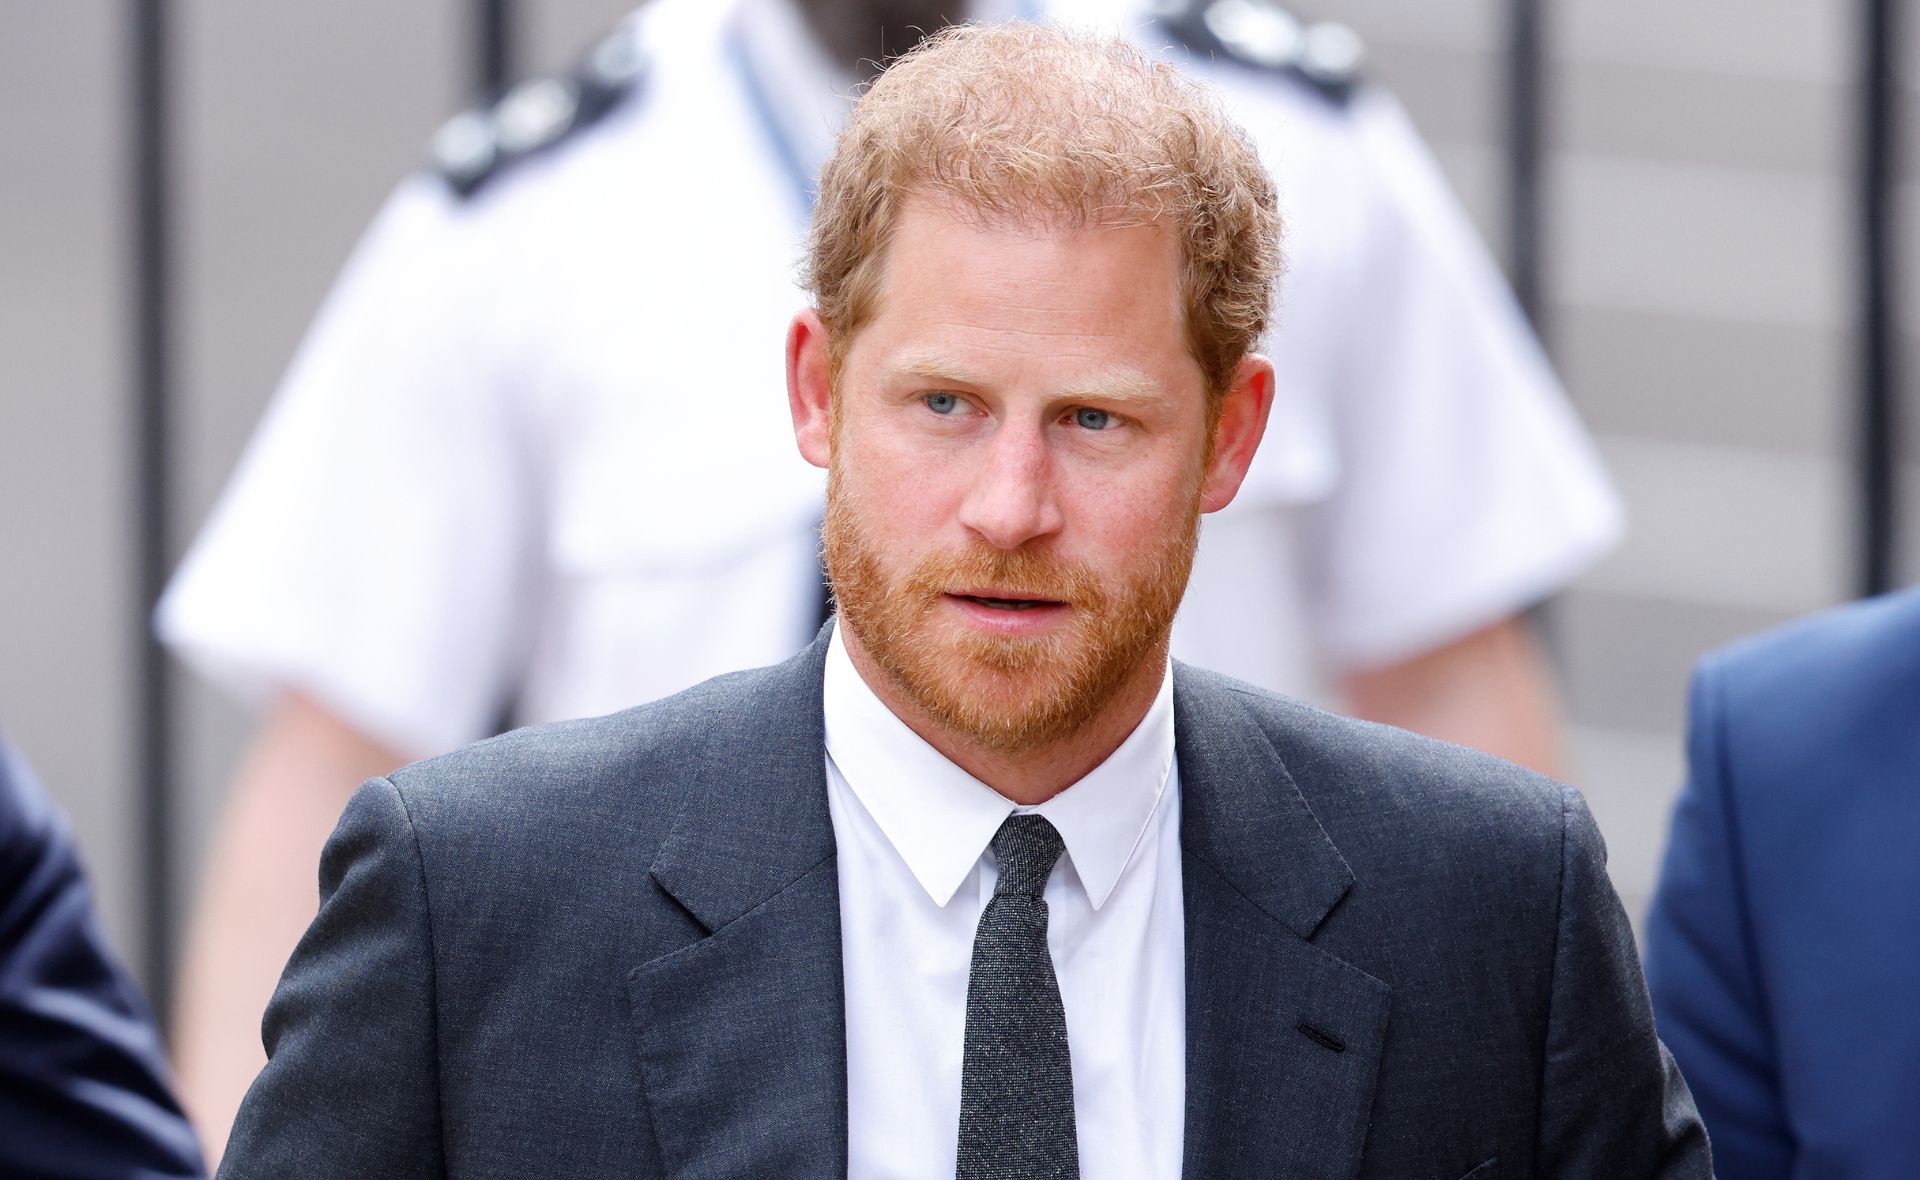 Prince Harry comes home without Meghan Markle